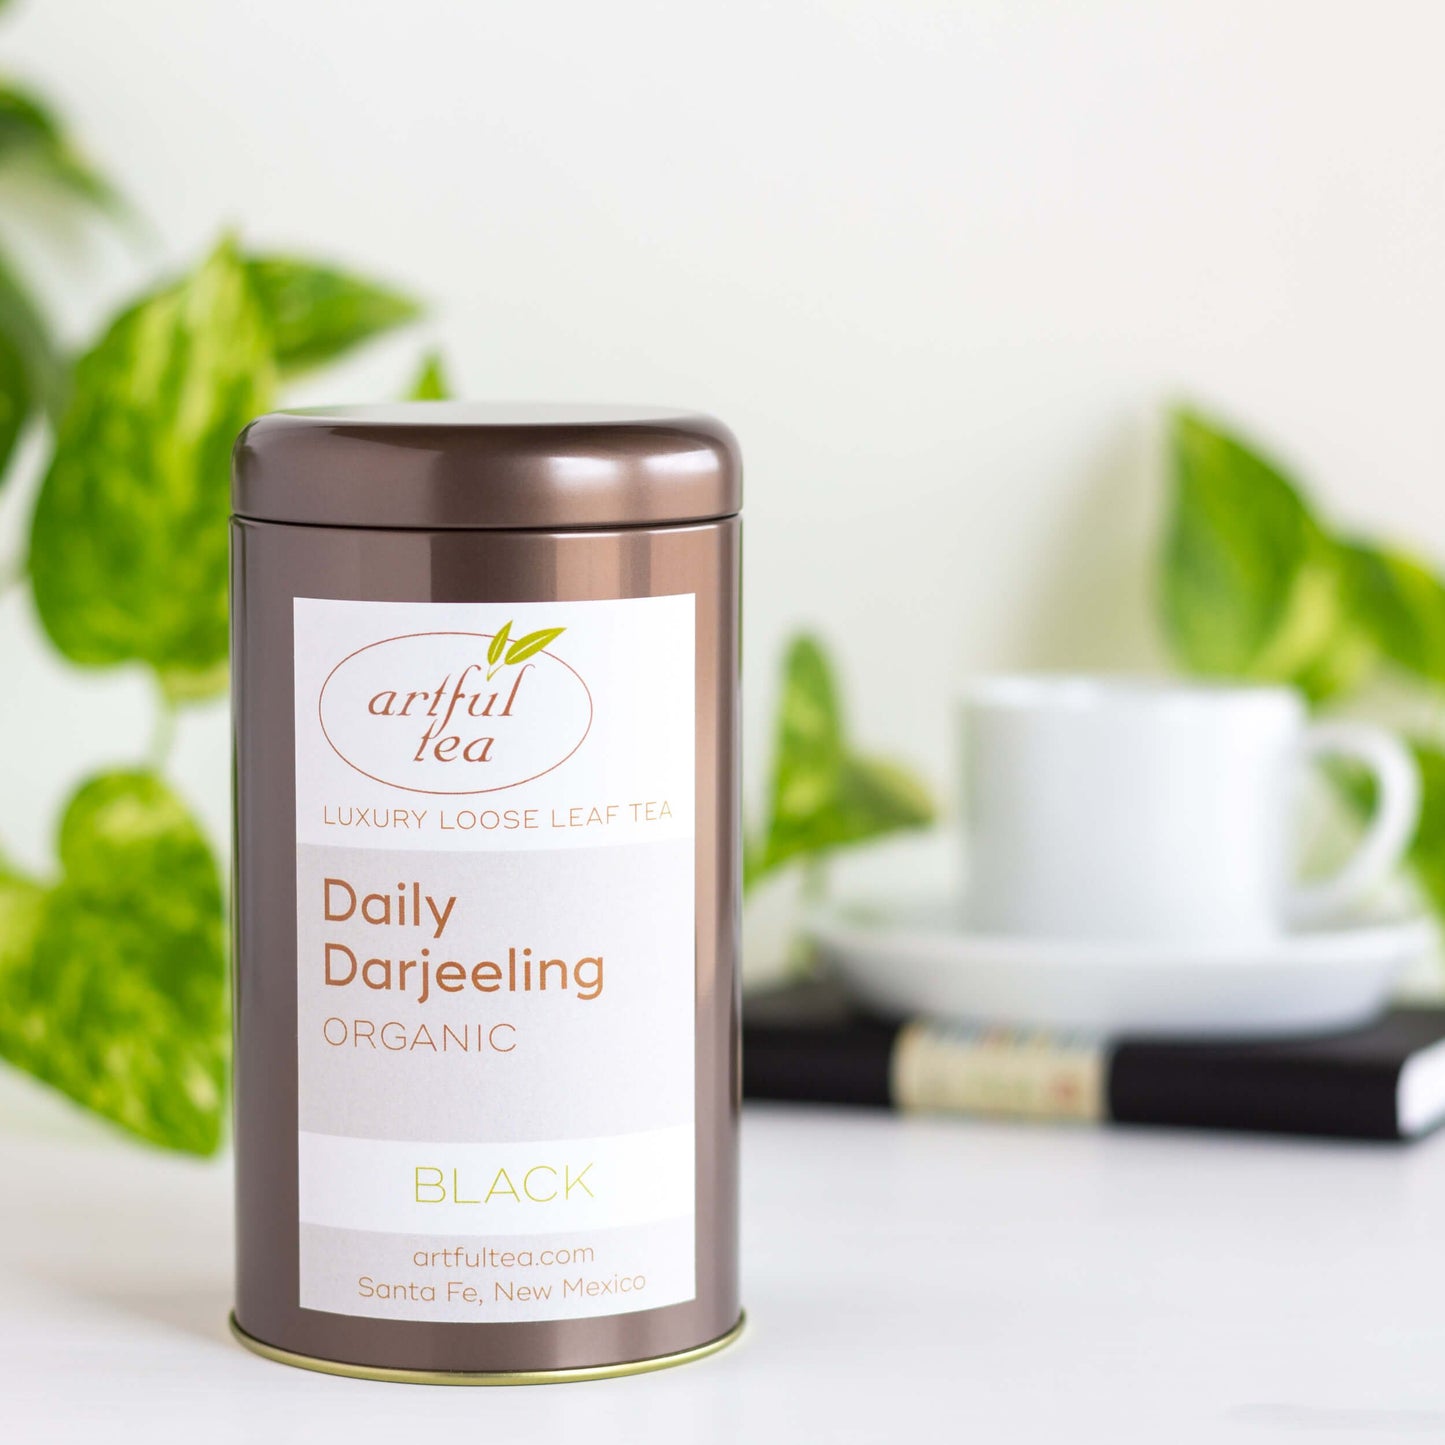 Organic Darjeeling Black Tea shown packaged in a brown tin, with a white teacup and saucer on a black book and a green plant in the background